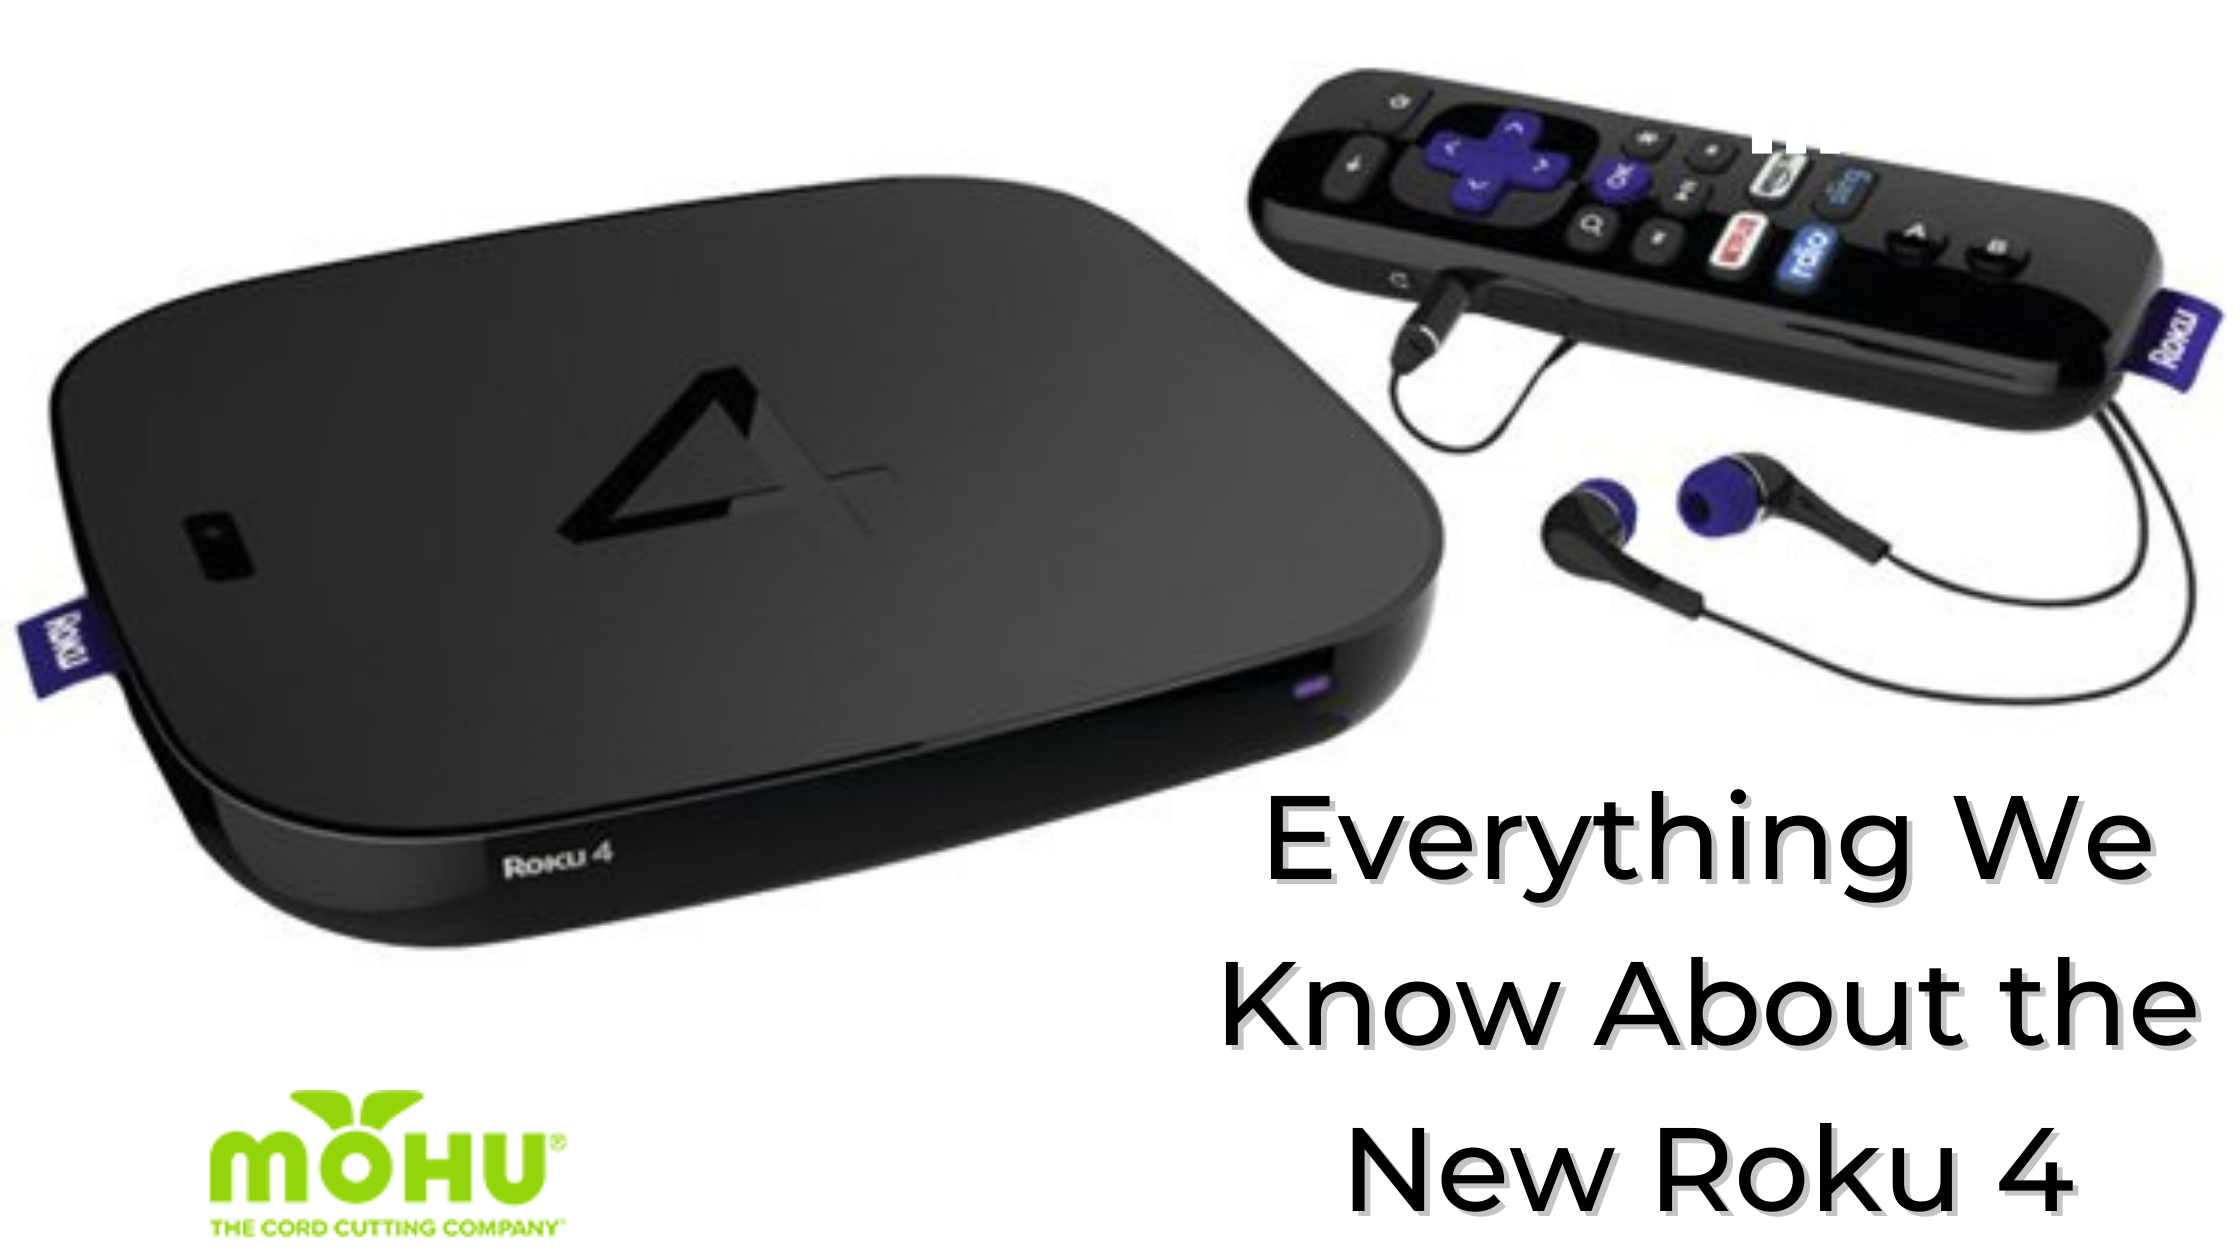 Everything We Know About the New Roku 4